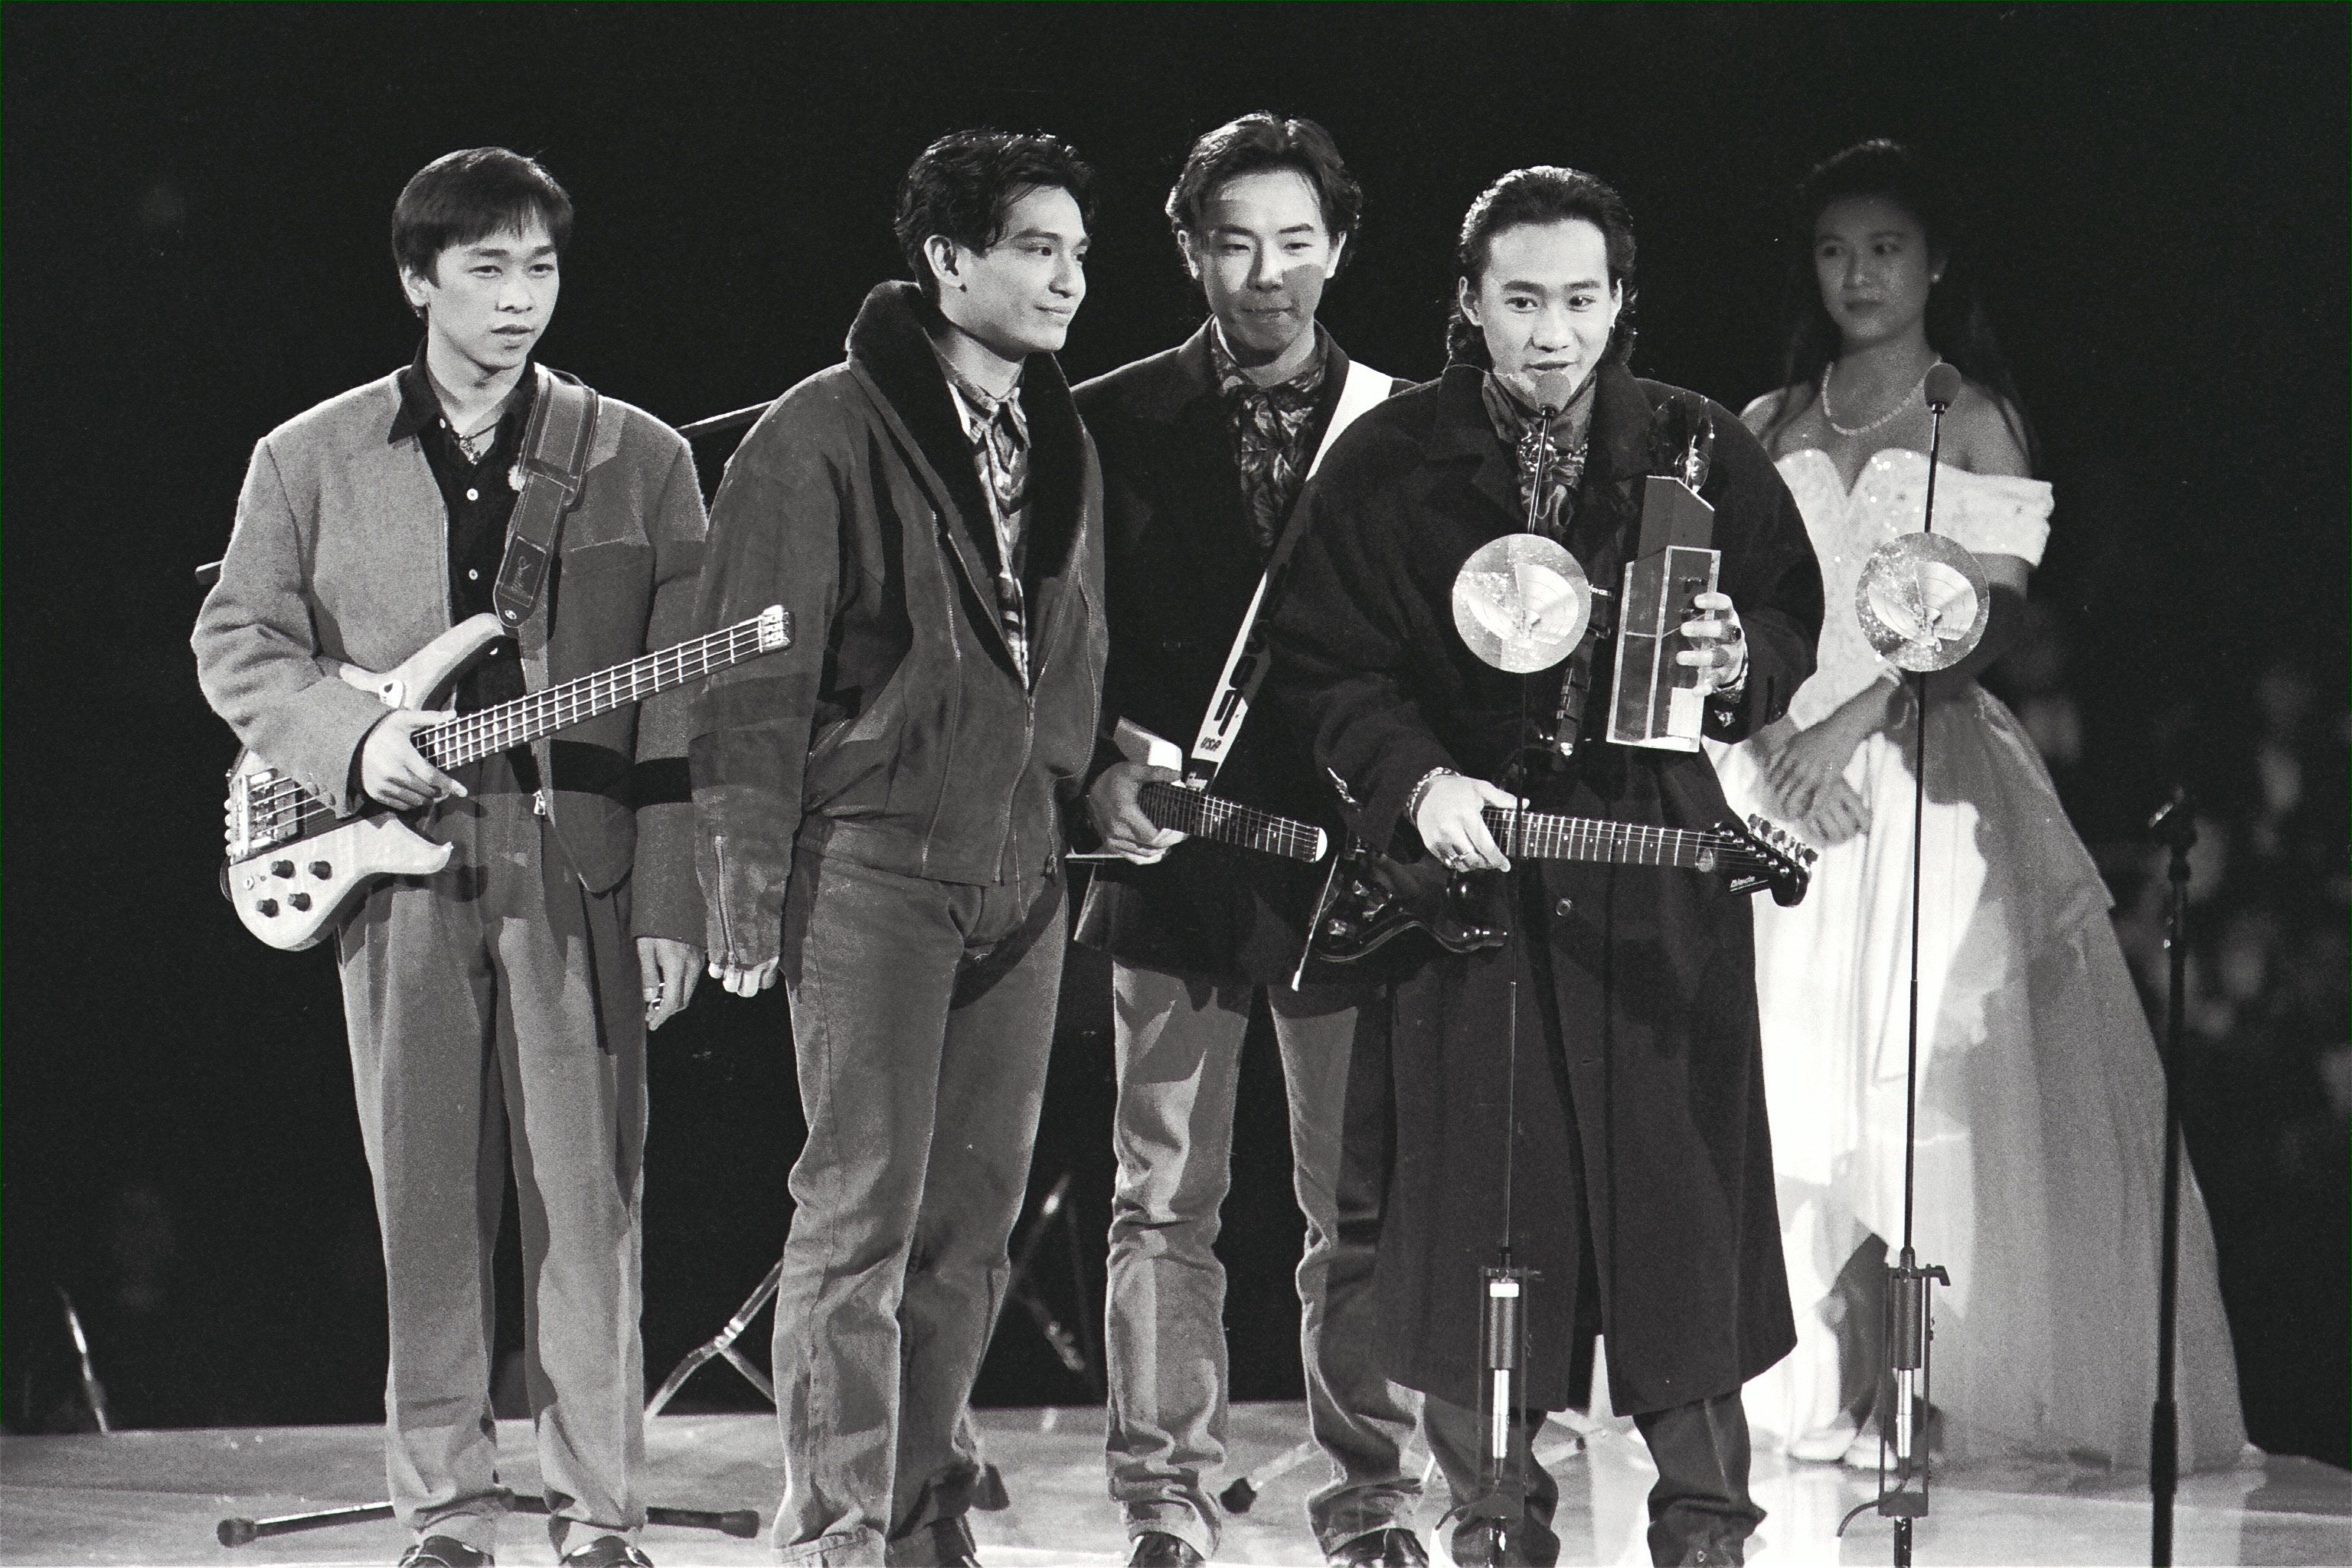 Performing Chinese Wall in 1985